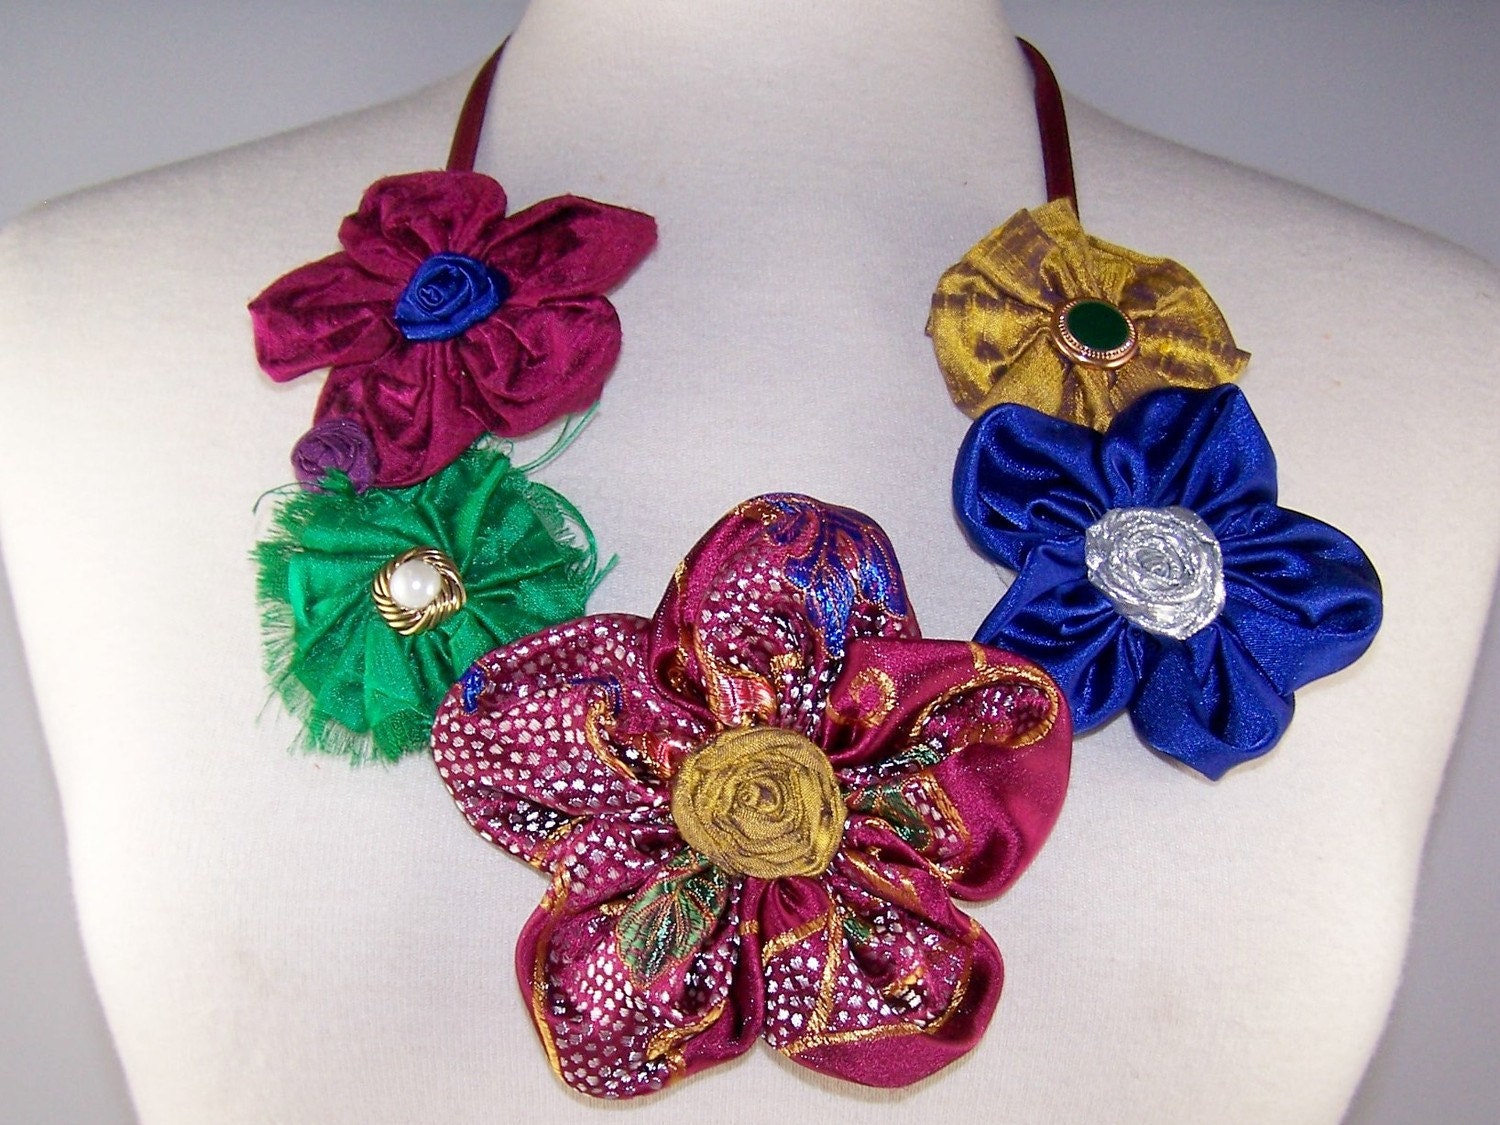 Jewel Toned Flower Cluster Necklace with Vintage Earrings and Buttons